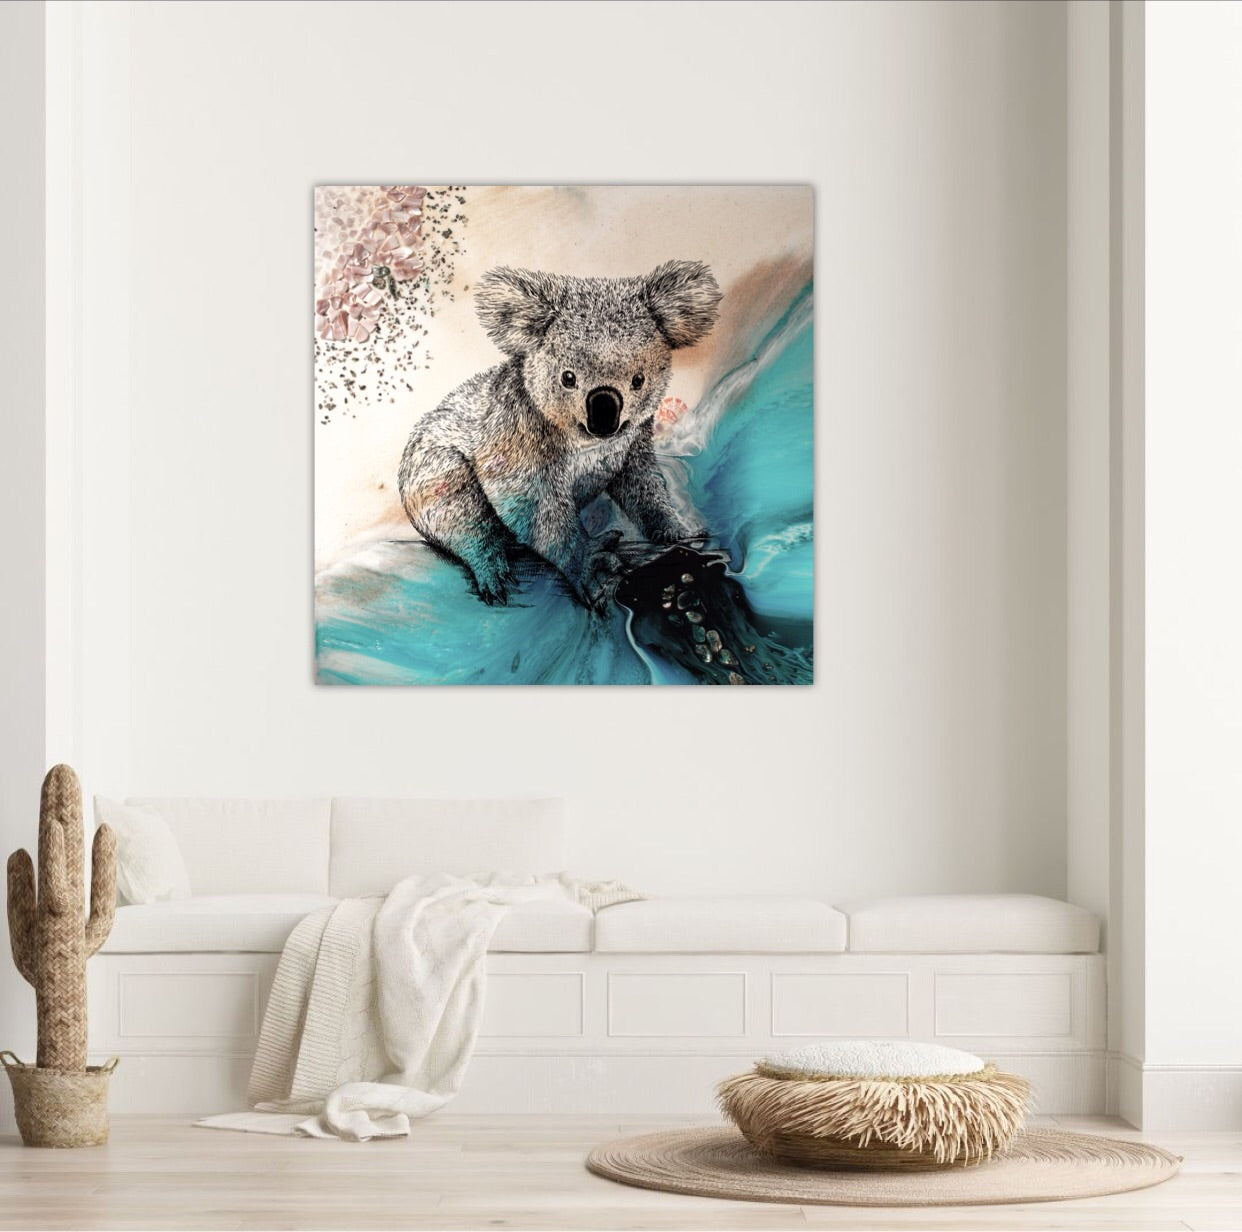 Abstract Ocean. Blue beach with Koala. Art Print. Antuanelle 5 Print for WWF Koala Conservation. Limited Edition